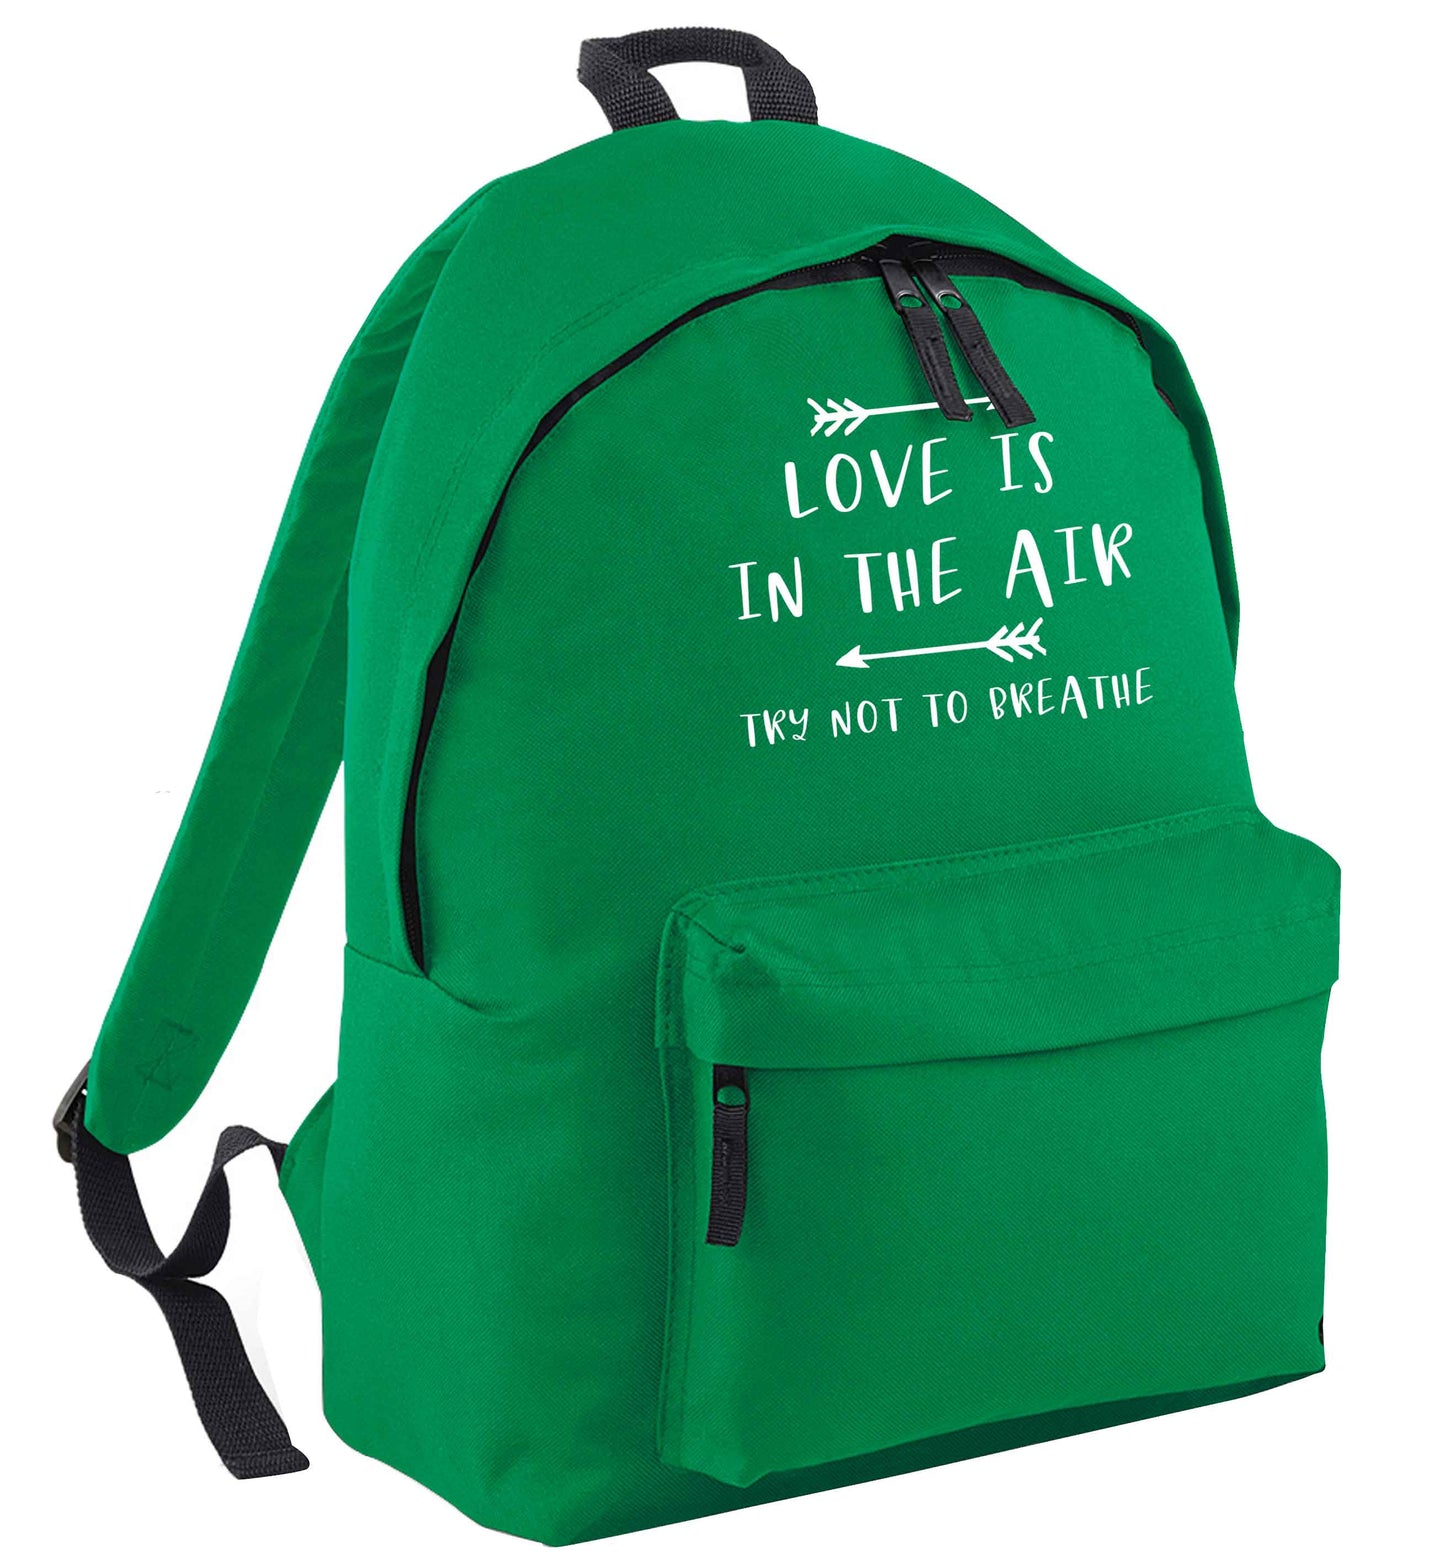 Love is in the air try not to breathe green adults backpack